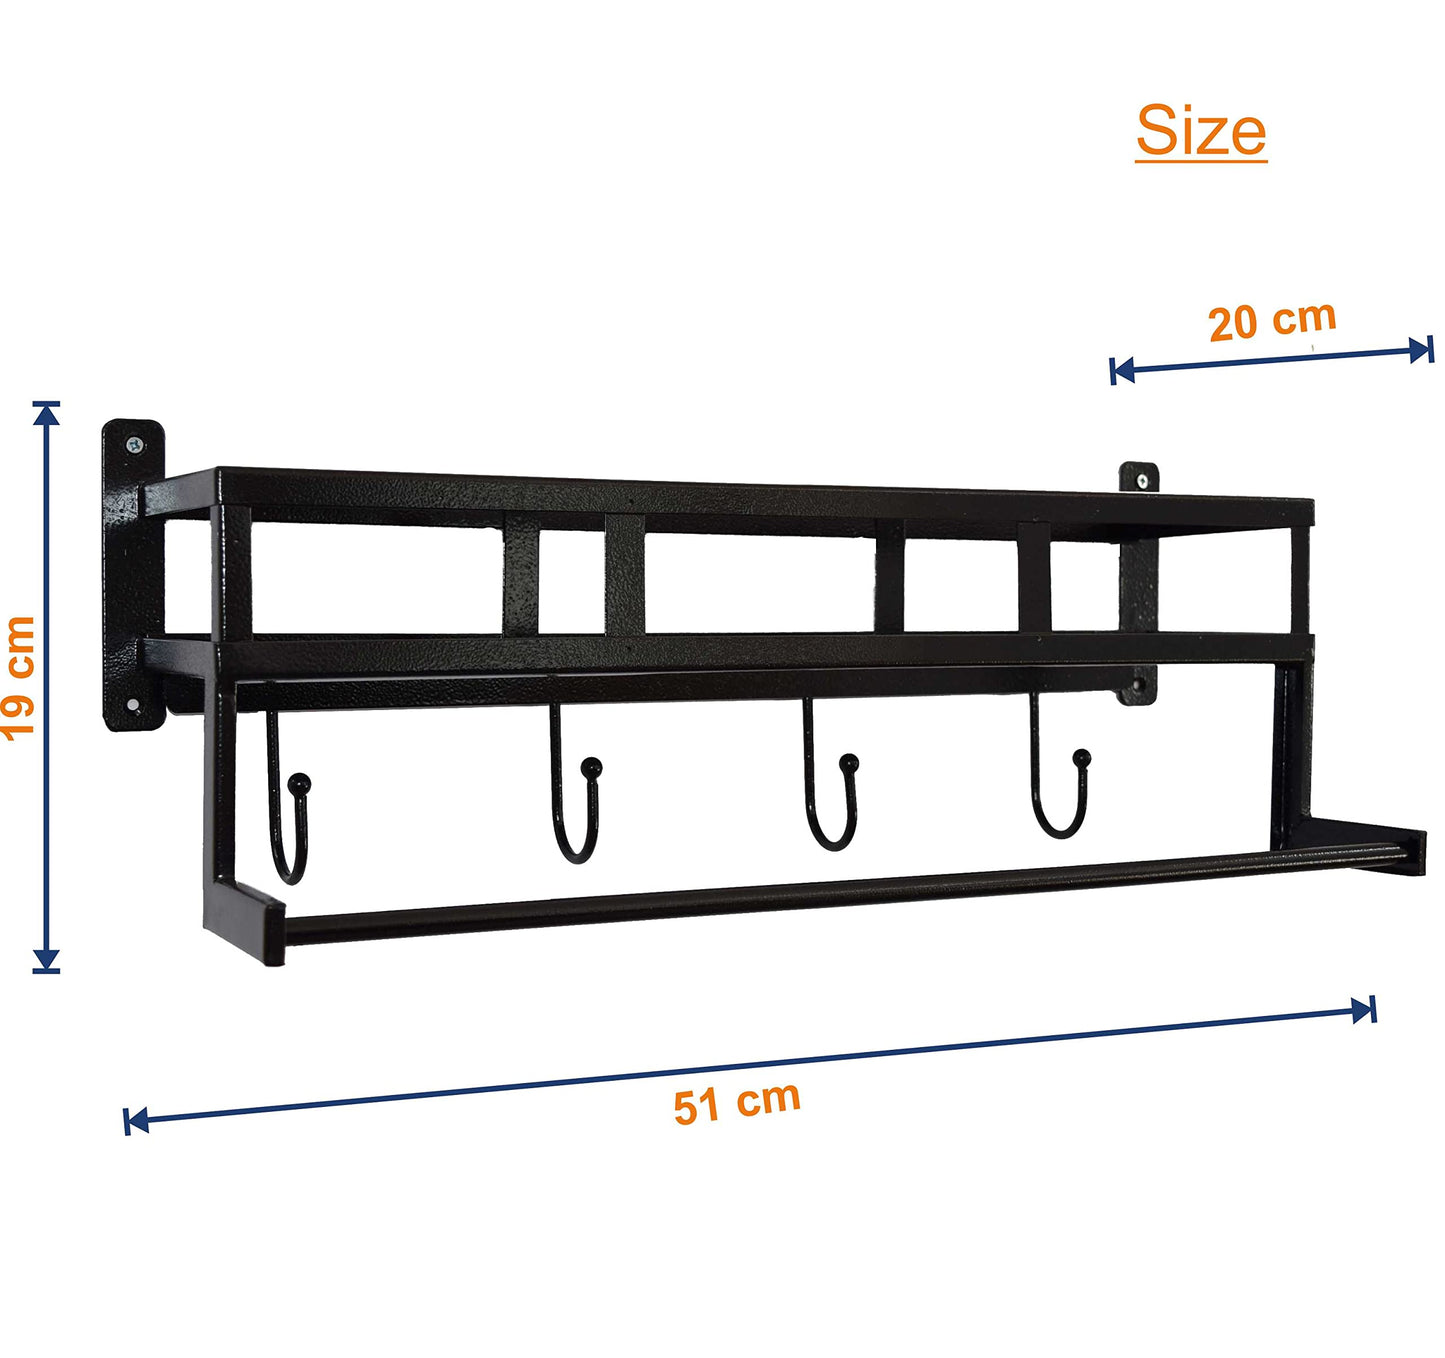 Crinds® Pure Metal Wall Mount Bathroom Shelf with Towel Stand and Hooks (Medium)